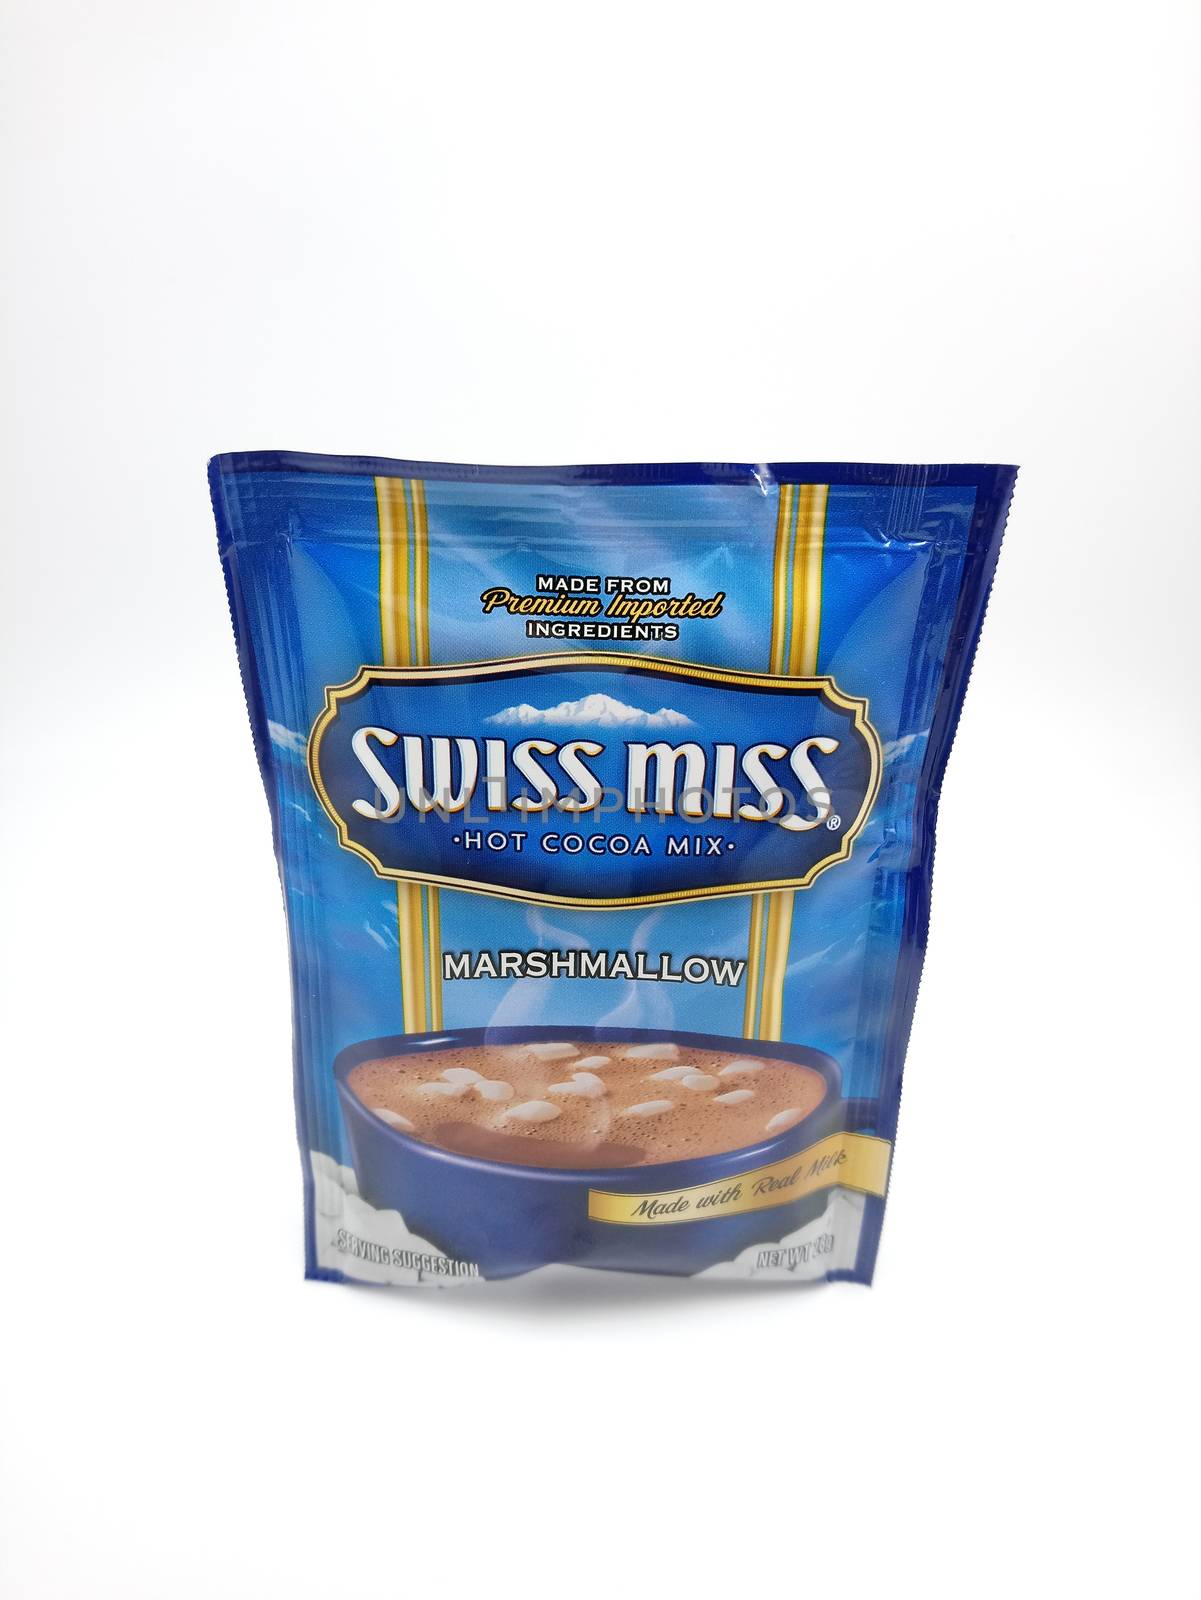 Swiss miss hot cocoa drink marshmallow in Manila, Philippines by imwaltersy